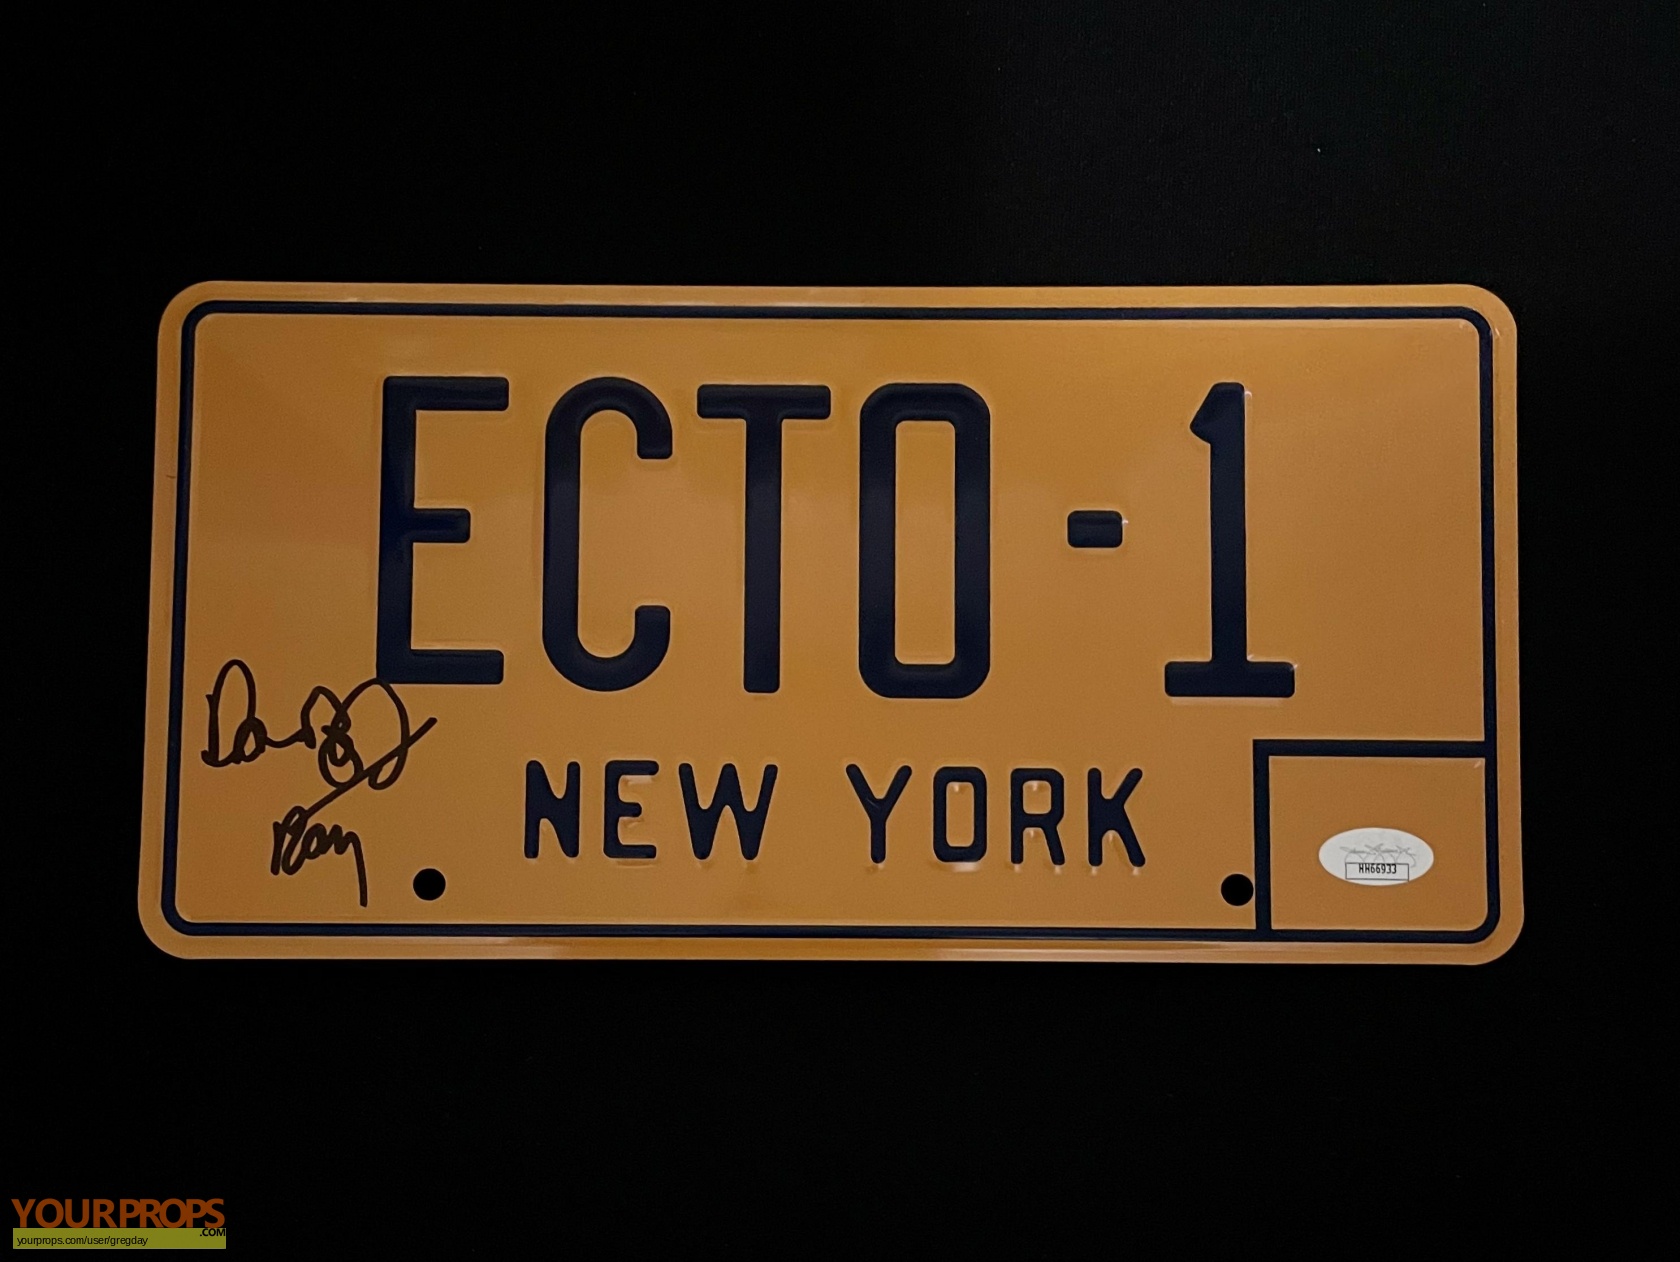 Ghostbusters ECTO1 License Plate Autographed by Dan Aykroyd replica